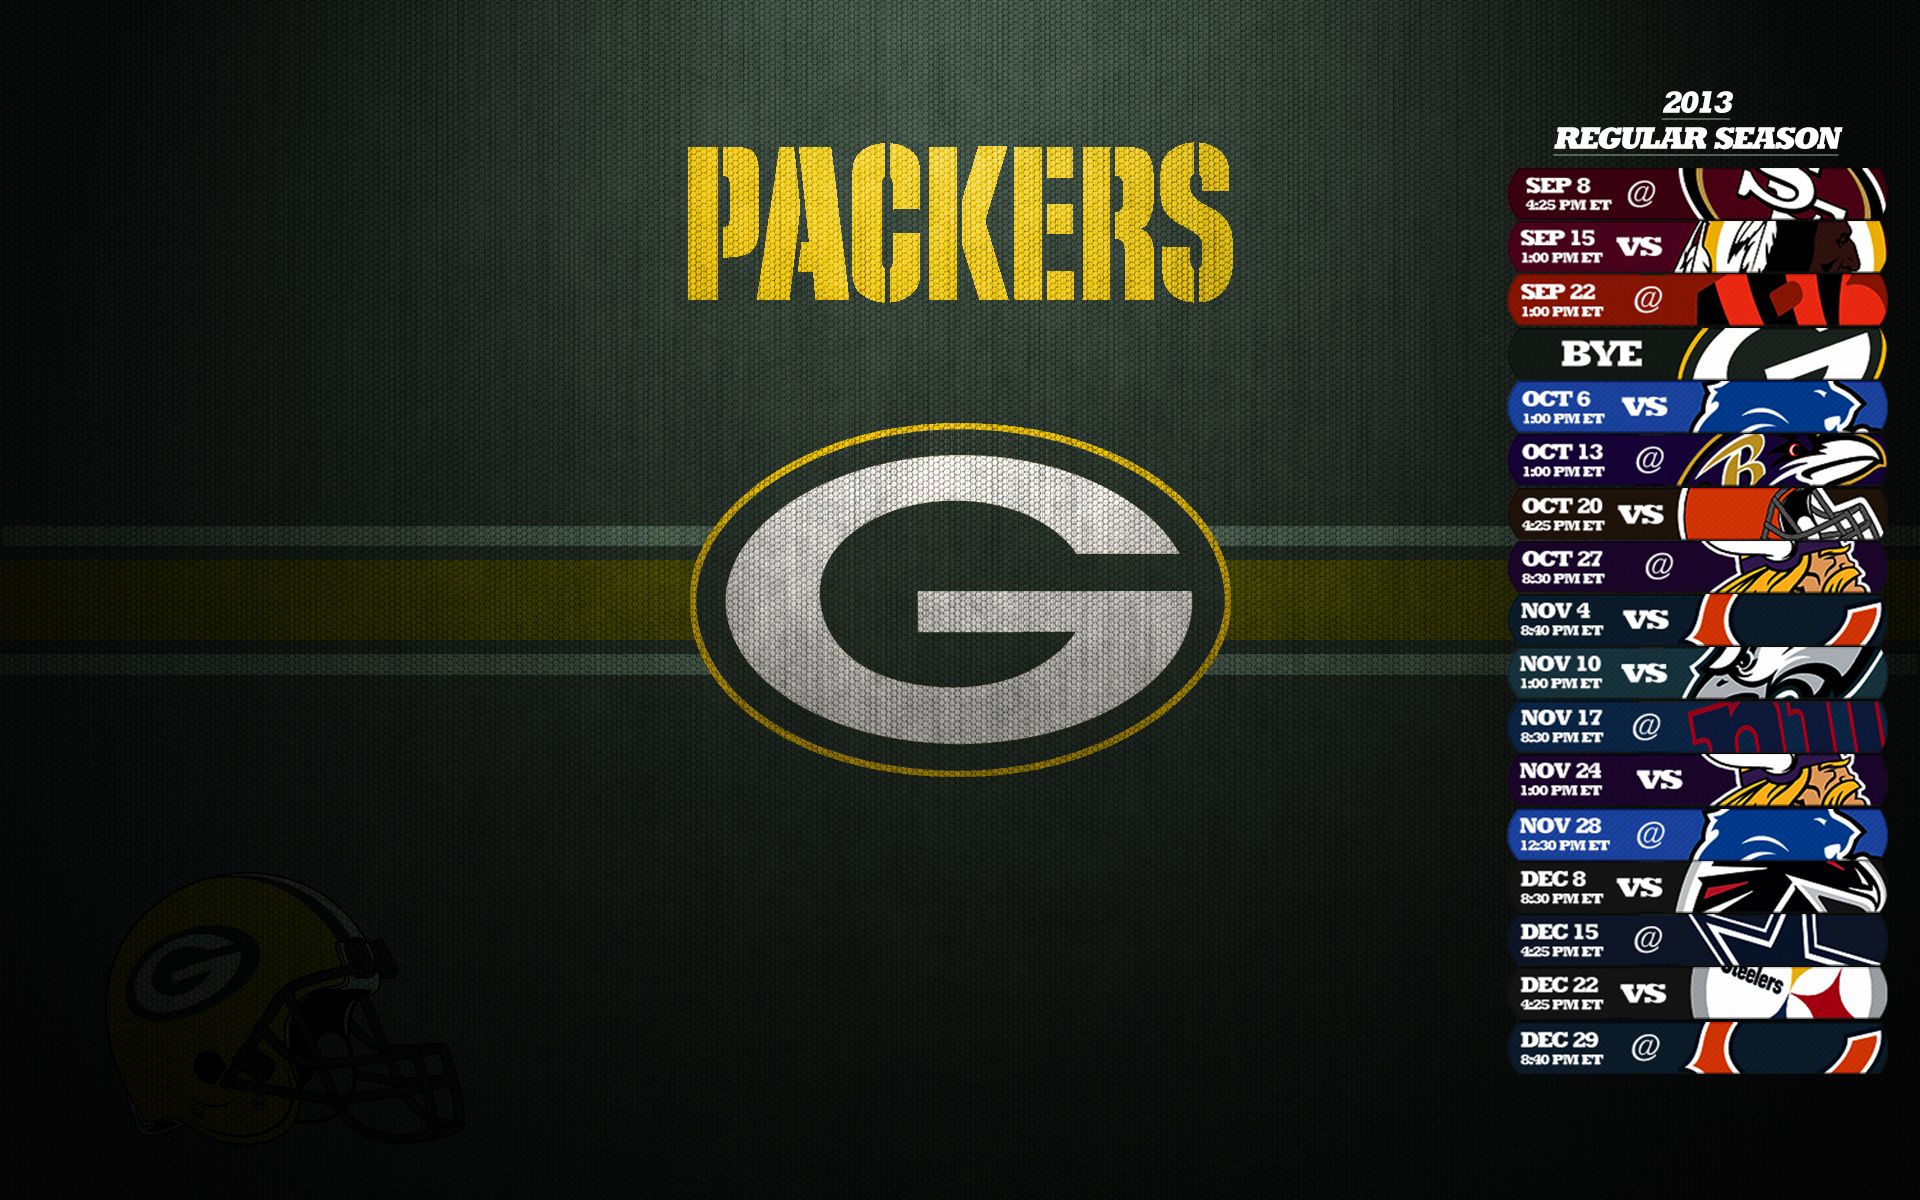 Green Bay Packers Schedule 2013 Wallpaper - Green Bay Packers ...